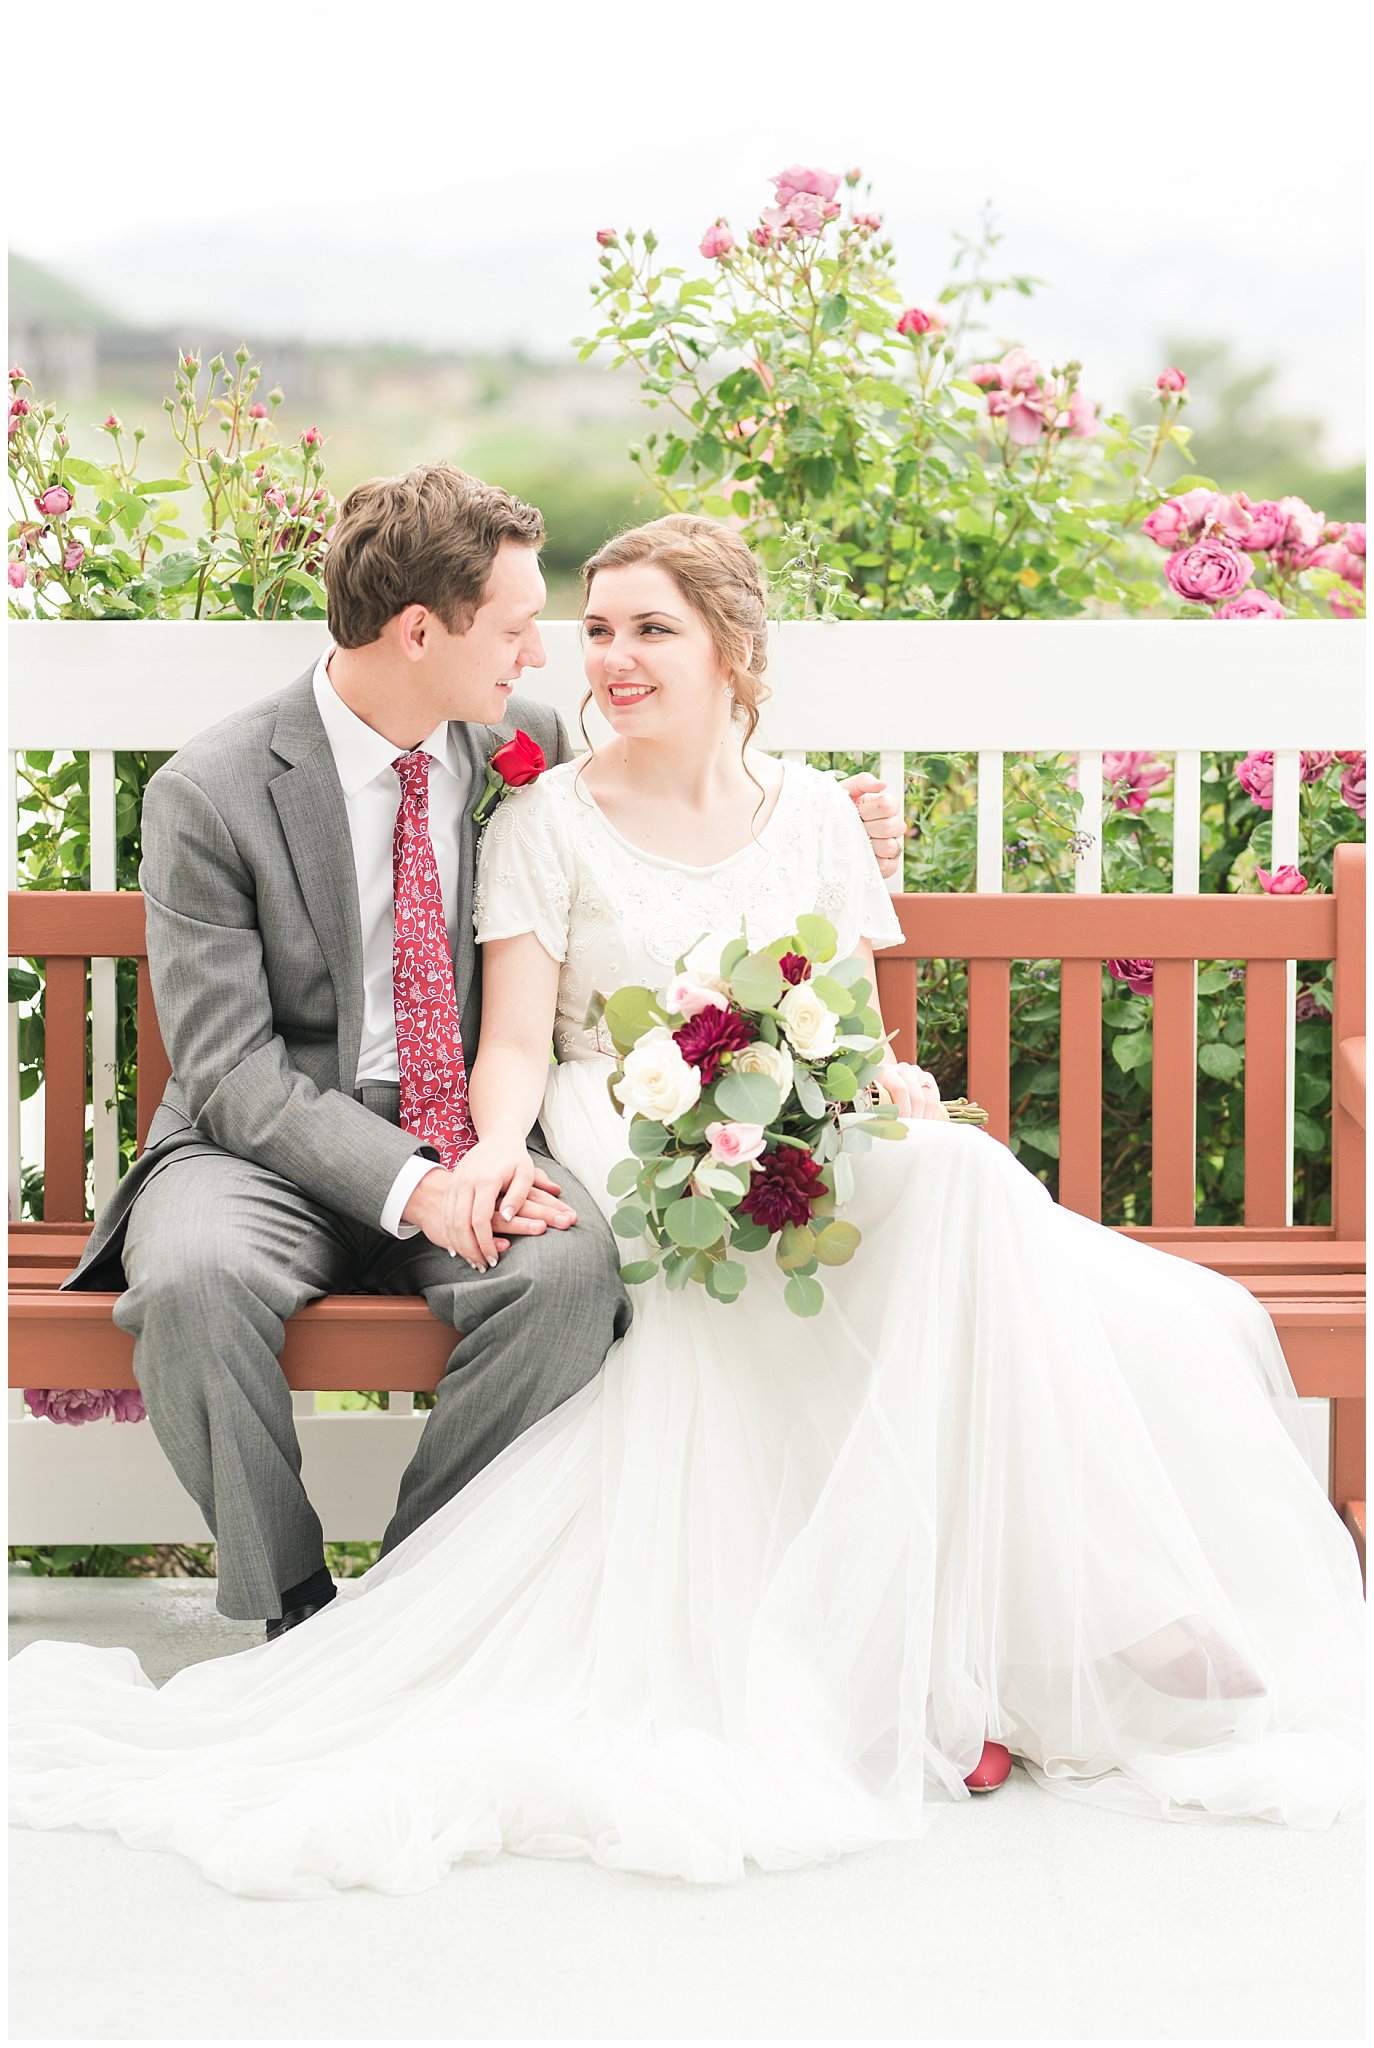 Bride and groom portraits on bench | Grey, Burgundy, and Gold Wedding | Draper Temple and South Mountain Wedding | Utah Wedding Photographers | Jessie and Dallin Photography